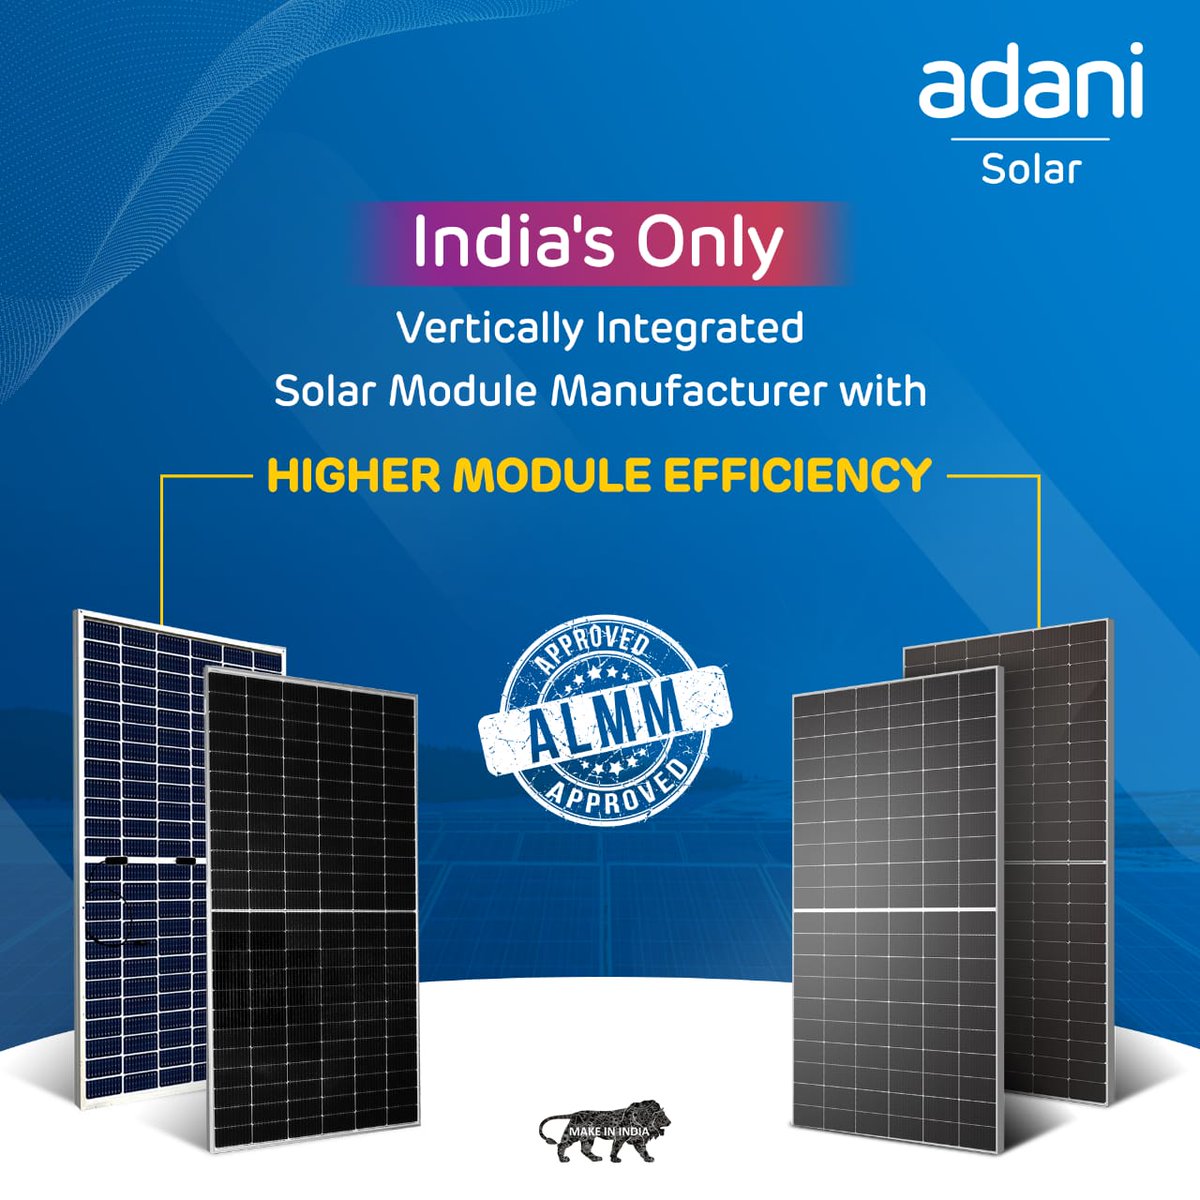 We're delighted to share that Adani Solar's solar PV modules are ALMM approved as per the recent list published by MNRE.

Let's move closer to a sustainable future, one step at a time!

#AdaniSolar #ALMM #ALMMapproved #HigherEfficiency #MakeInIndia